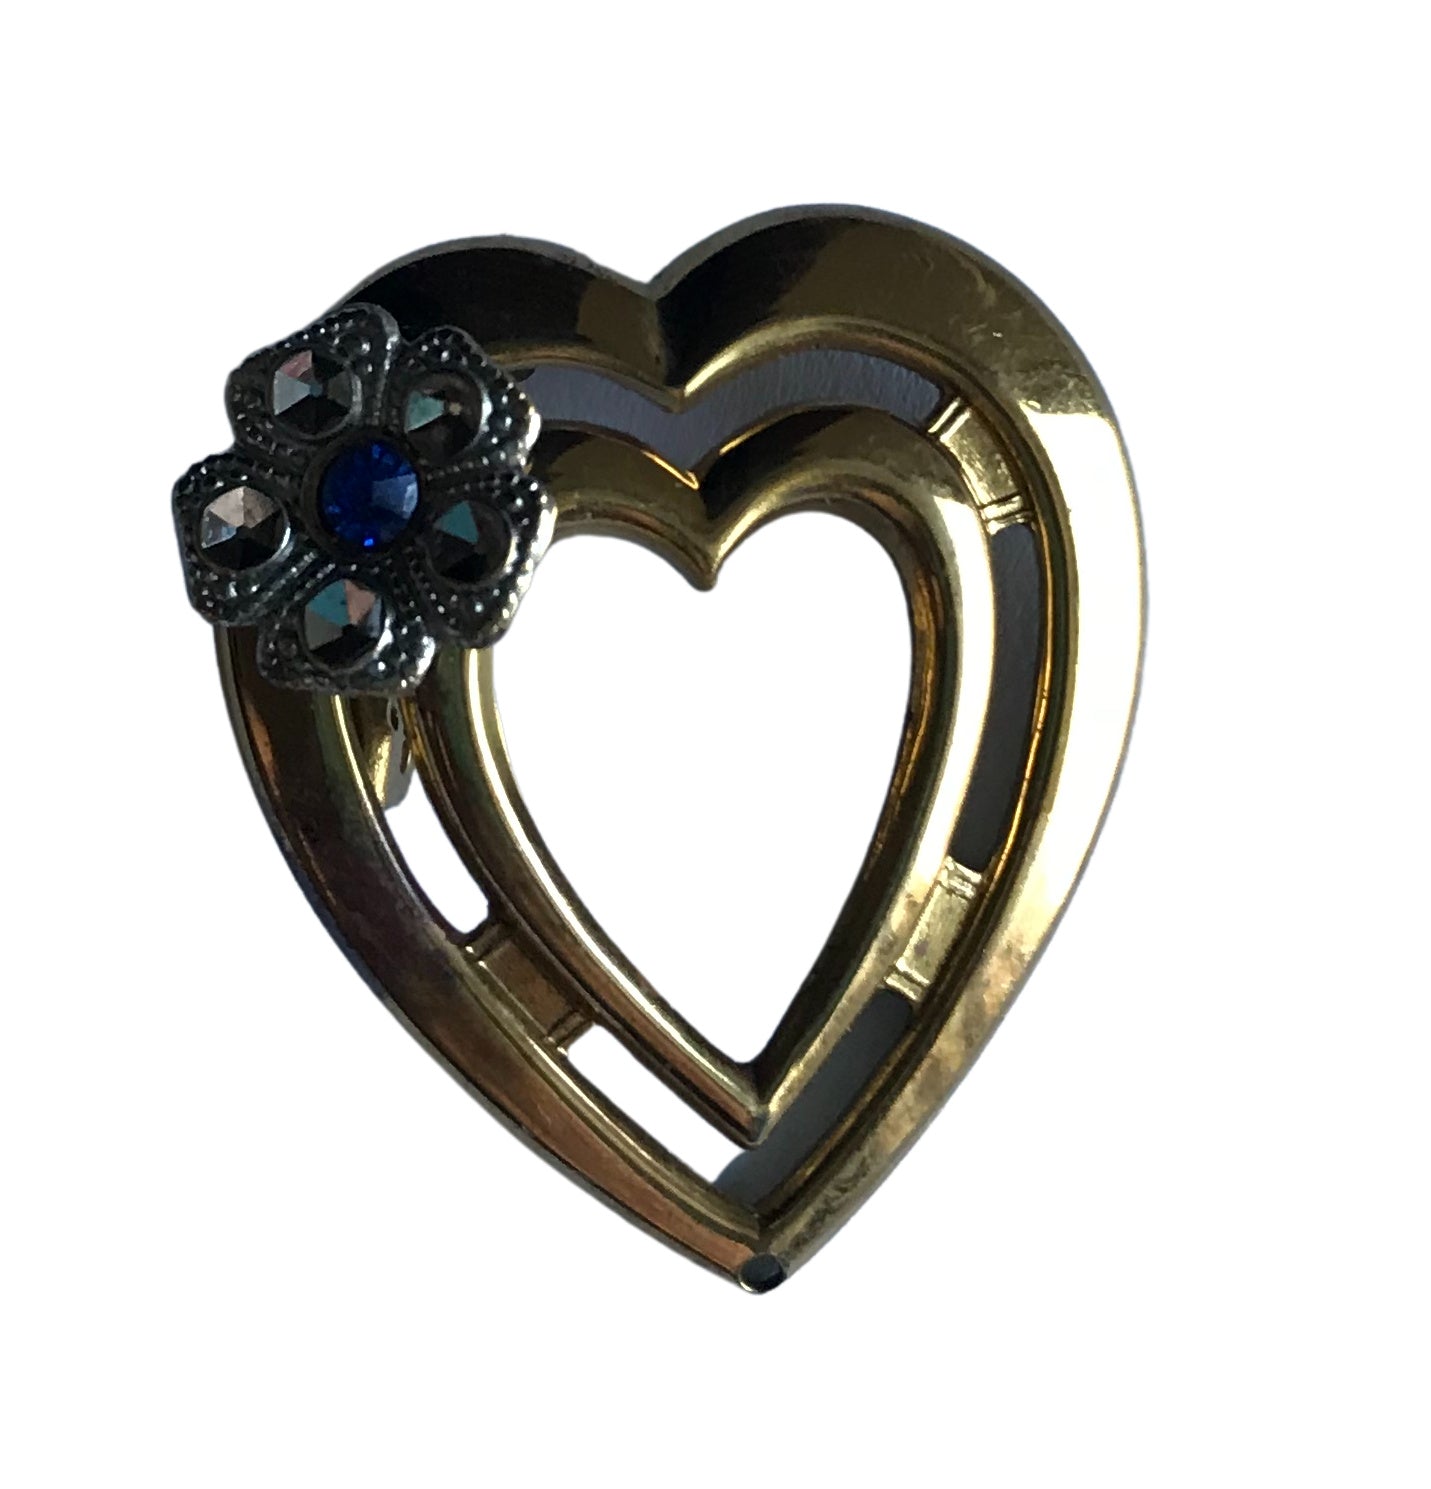 Blue and Clear Rhinestone Flower Accented Gold Tone Metal Heart Brooch circa 1950s